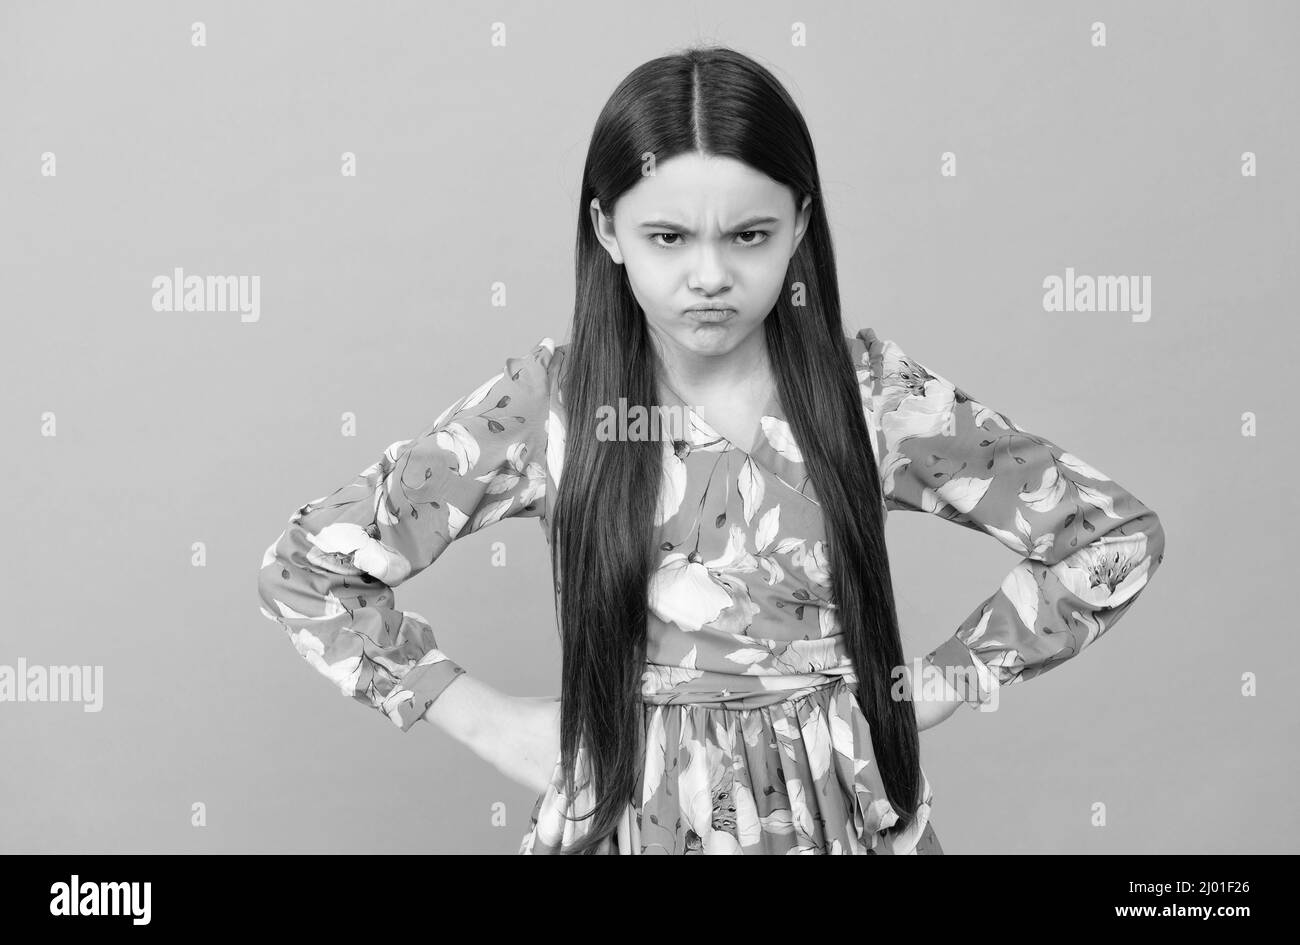 Disobedient spoilt girl child frown keeping arms akimbo blue background, disobedience Stock Photo